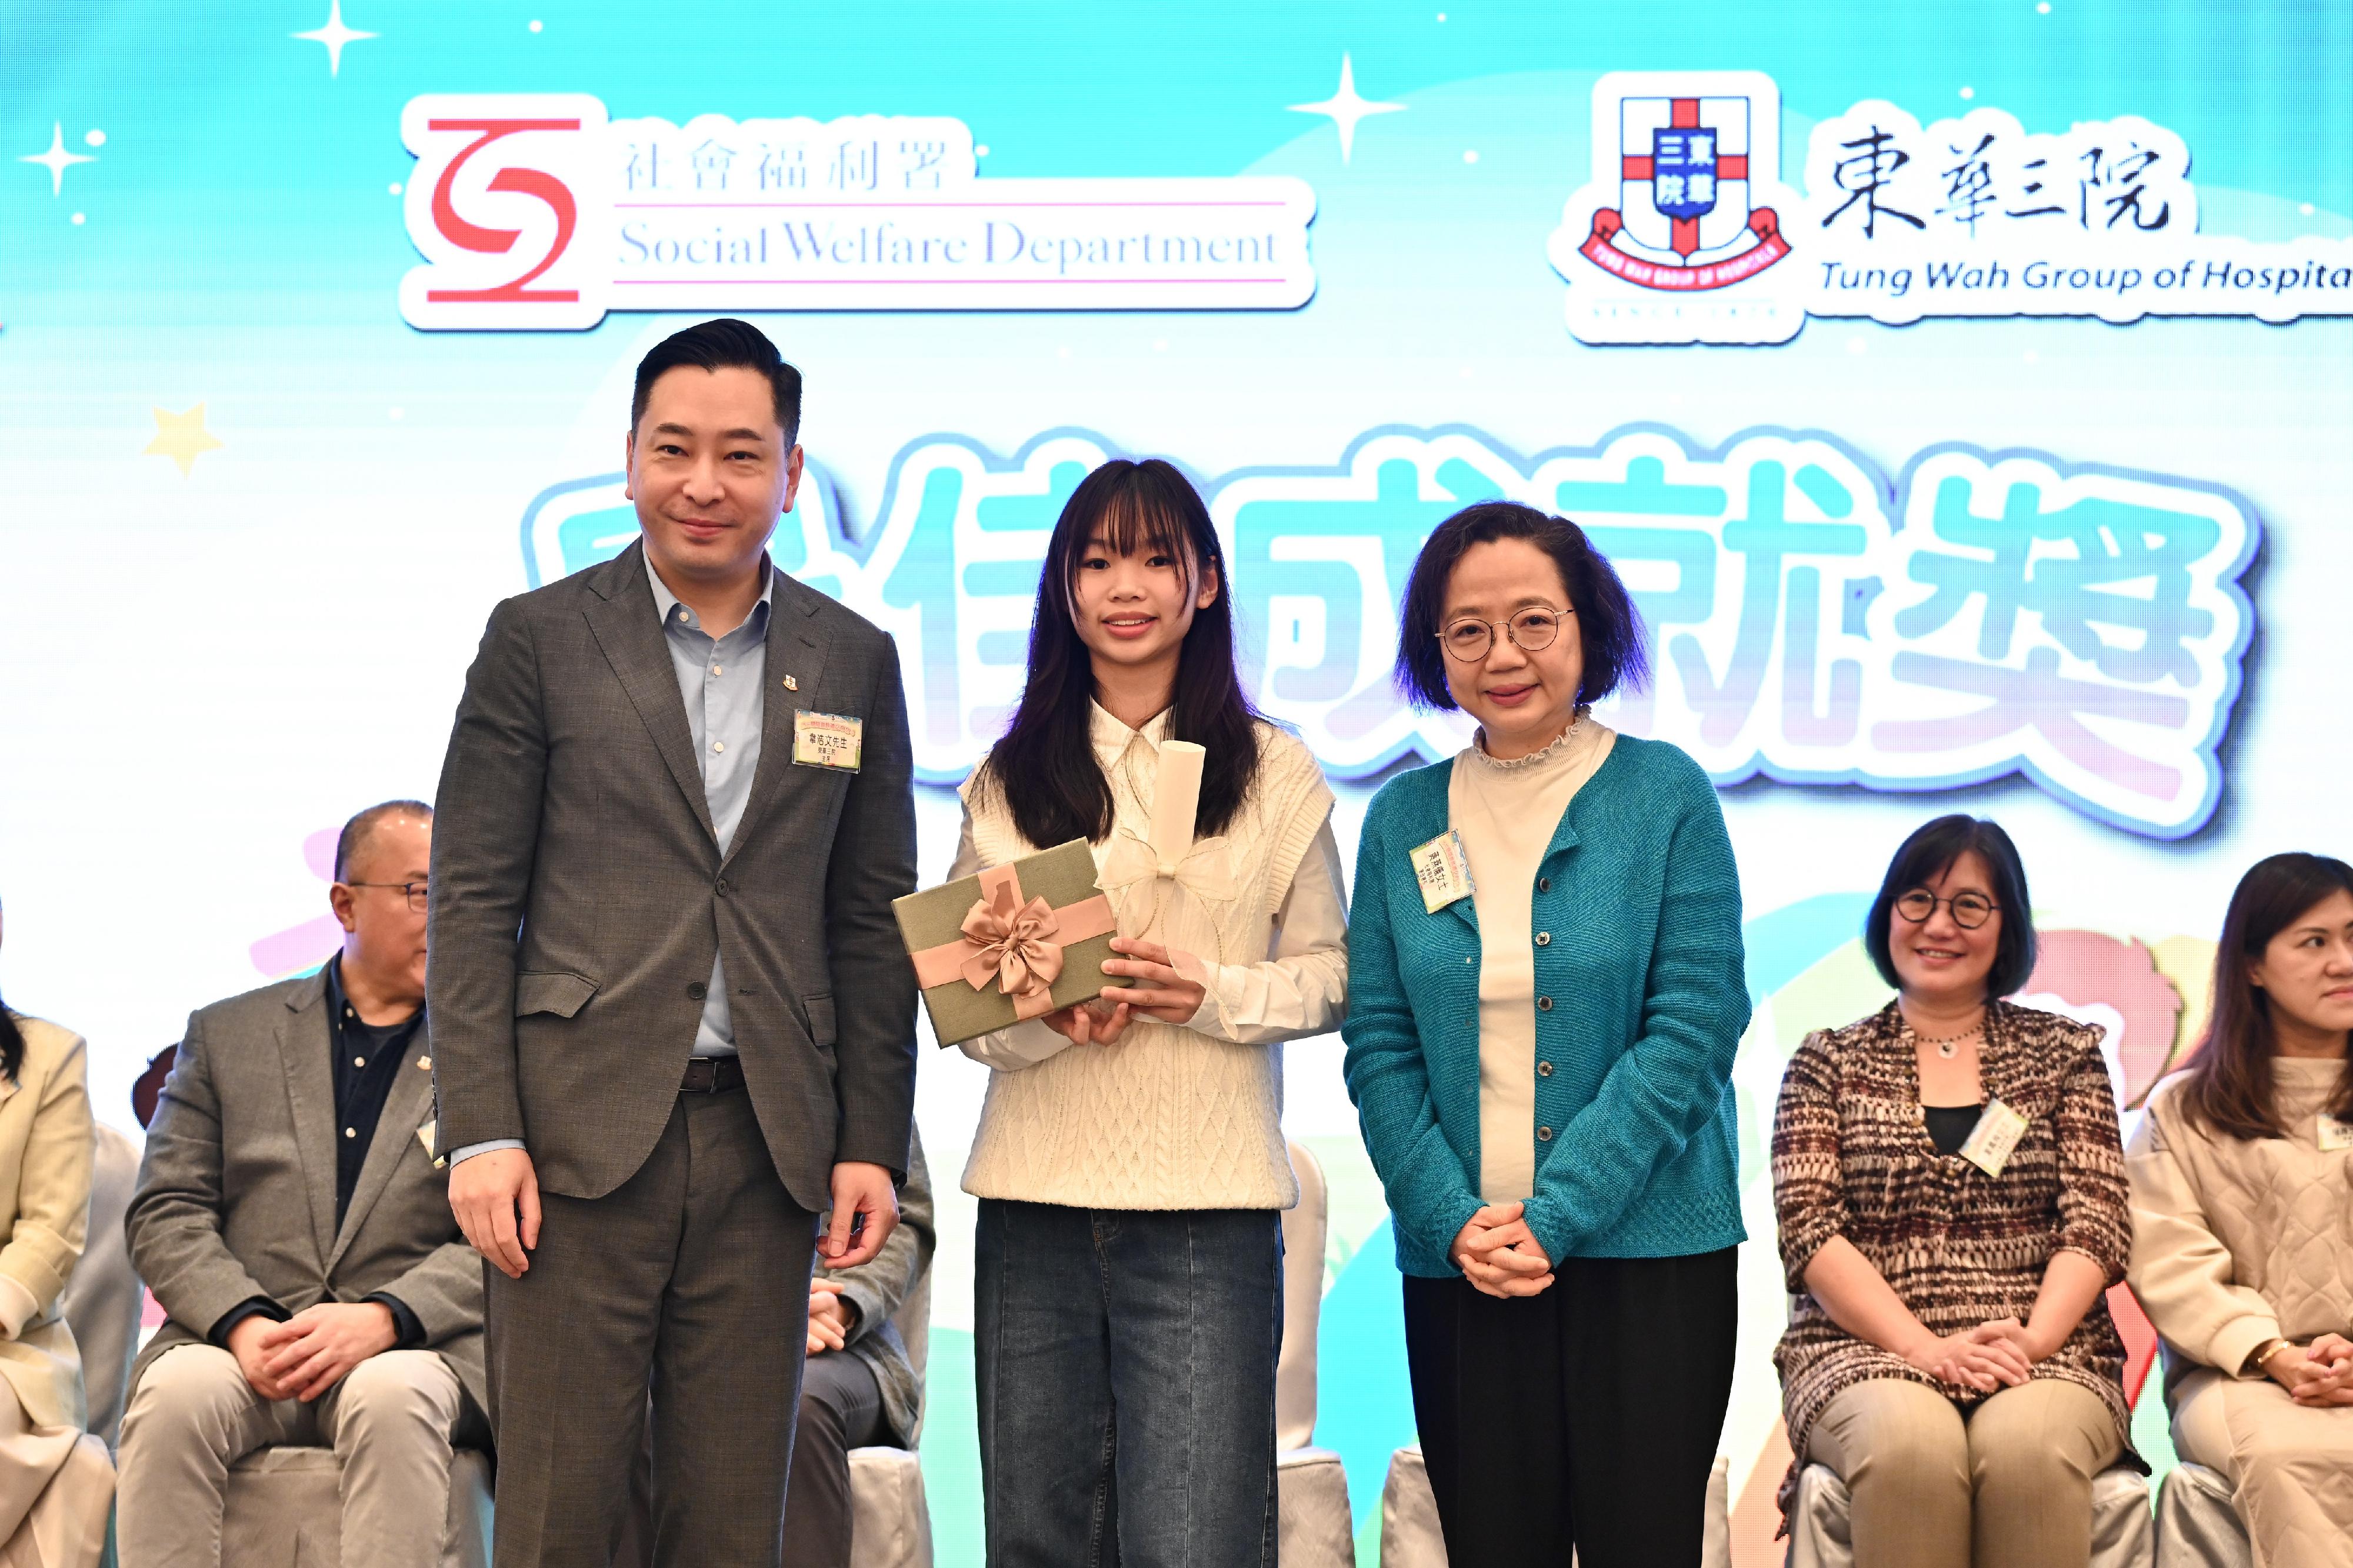 The Acting Director of Social Welfare (DSW), Ms Wong Yin-yee (right), and the Chairman of the Board of Directors of the Tung Wah Group of Hospitals, Mr Herman Wai (left), present a certificate to an awardee (centre) of the Best Achievement Award at the 2024 Award Presentation Ceremony for DSW wards today (March 16).